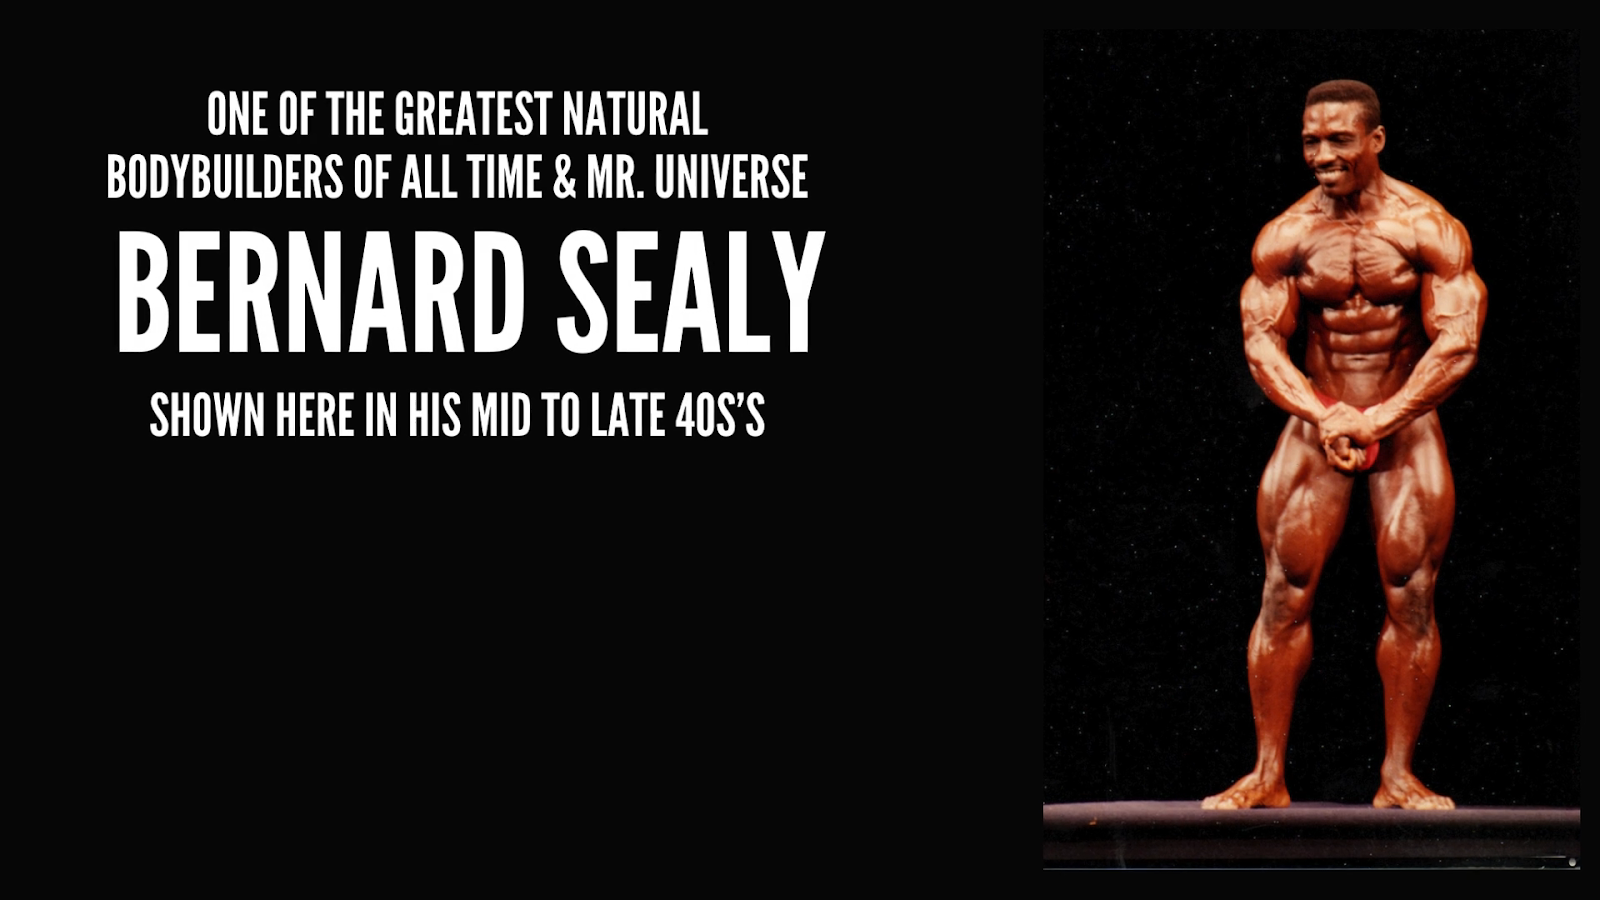 Natural Bodybuilder and Mr. Universe Bernard Sealy shown in his mid forties